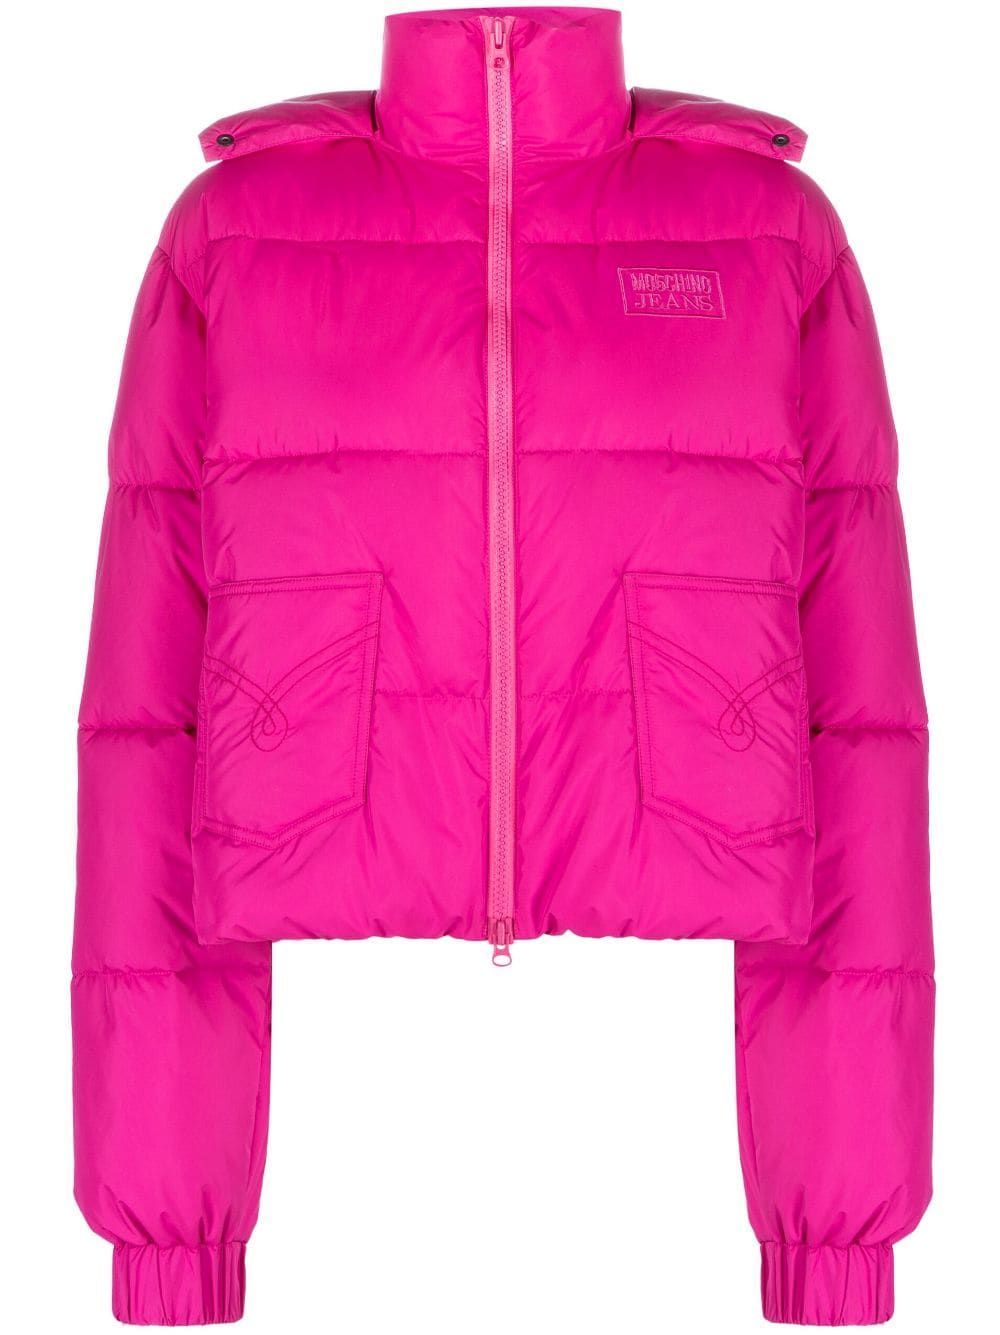 MOSCHINO JEANS logo-embroidered hooded puffer jacket - Pink von MOSCHINO JEANS